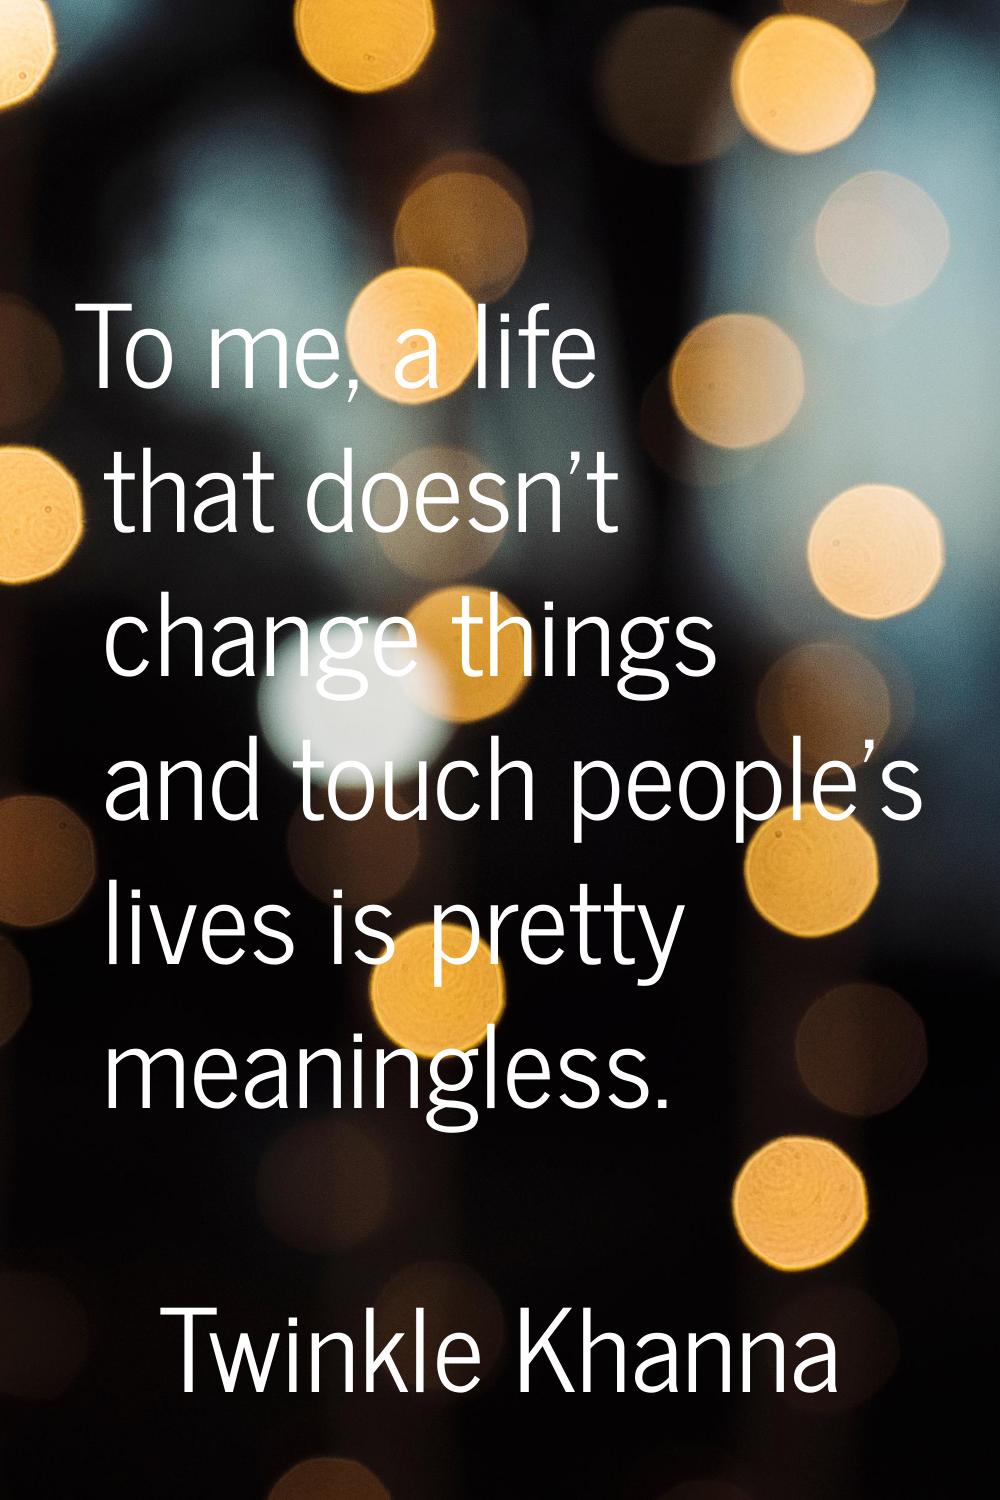 To me, a life that doesn't change things and touch people's lives is pretty meaningless.